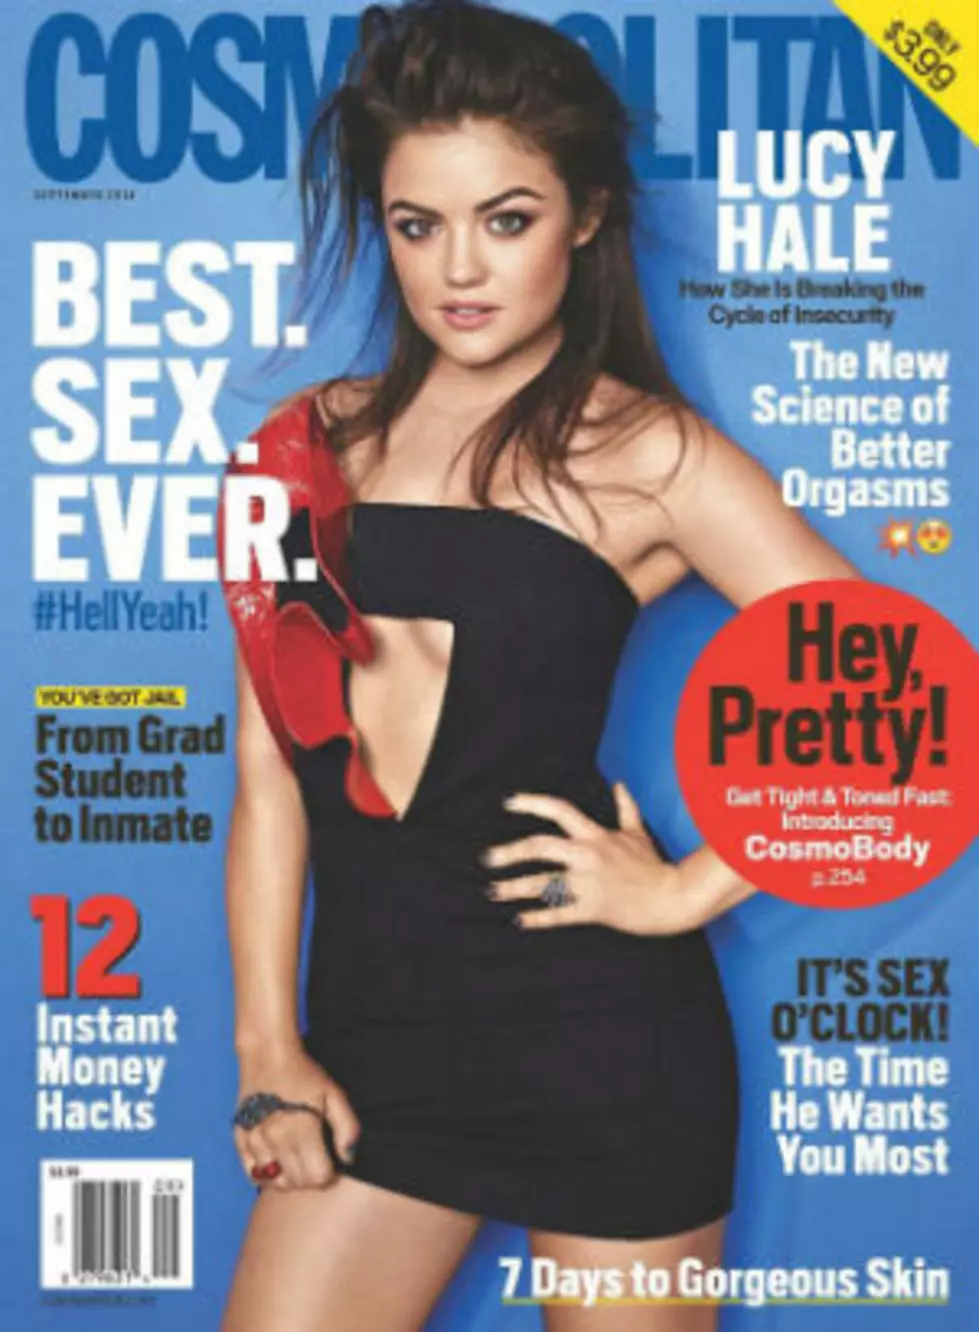 Lucy Hale Stuns on Cosmopolitan Cover